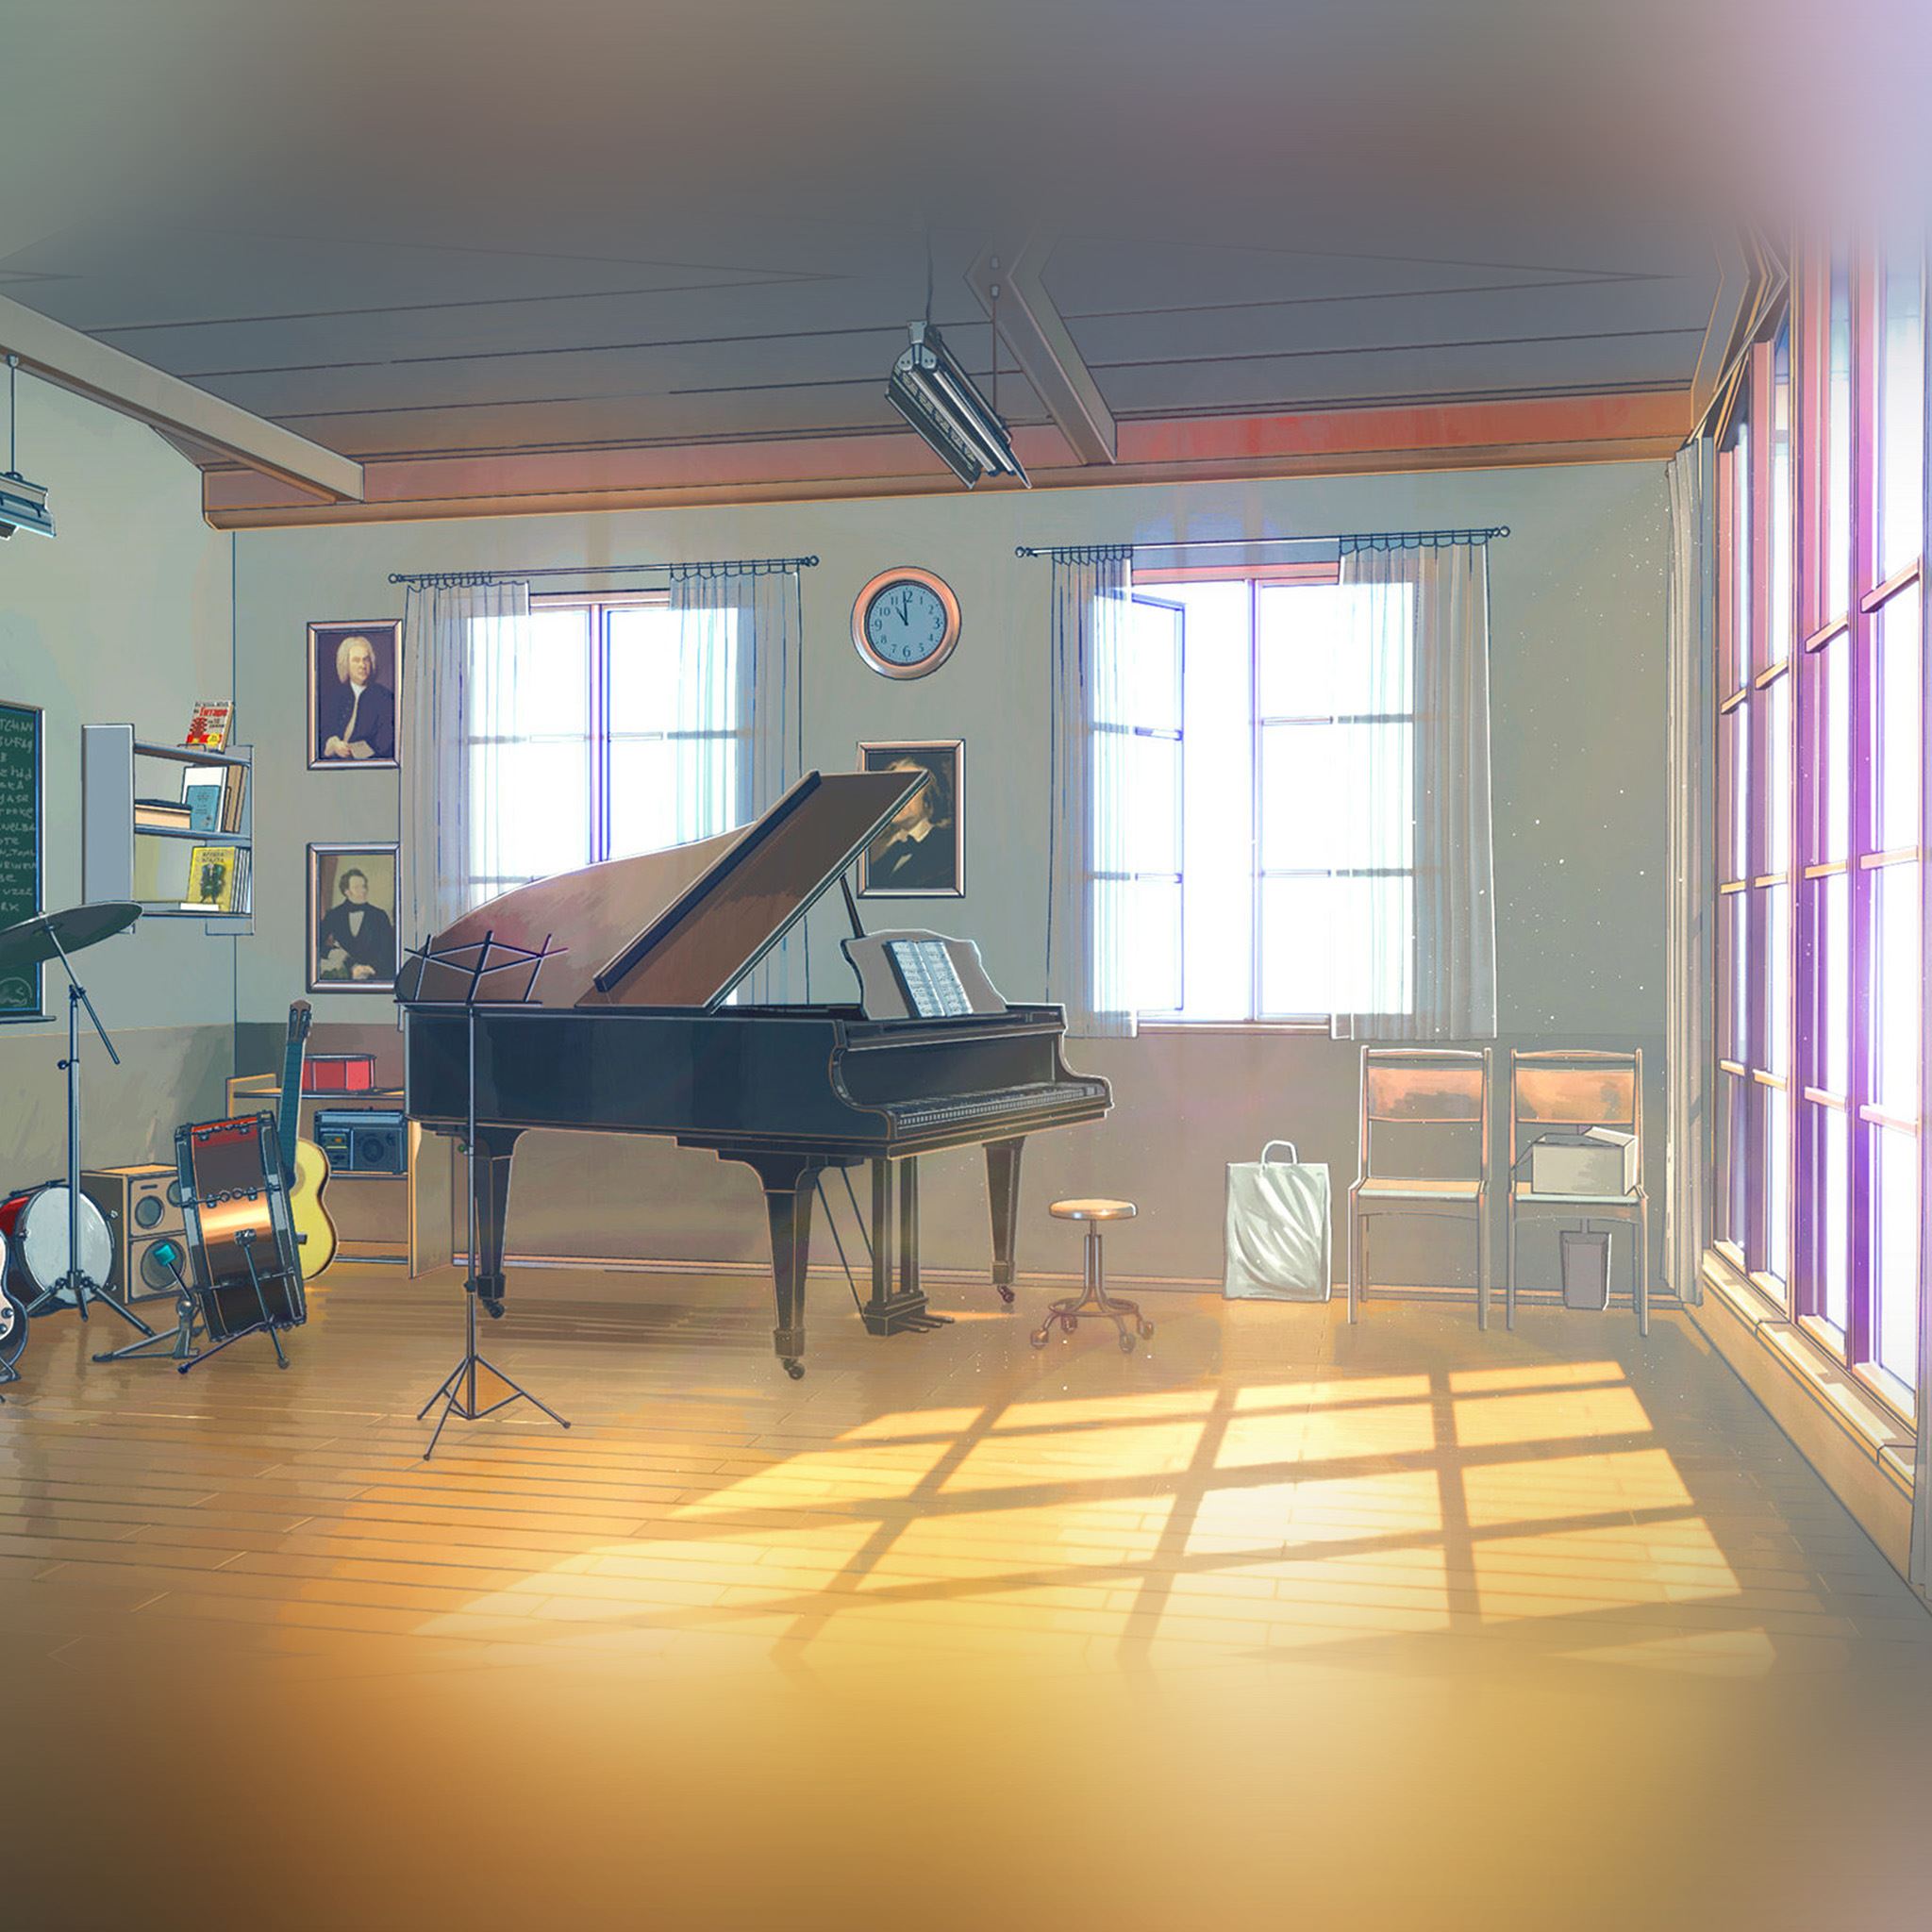 Anime boy and girl playing piano at sunset HD wallpaper download